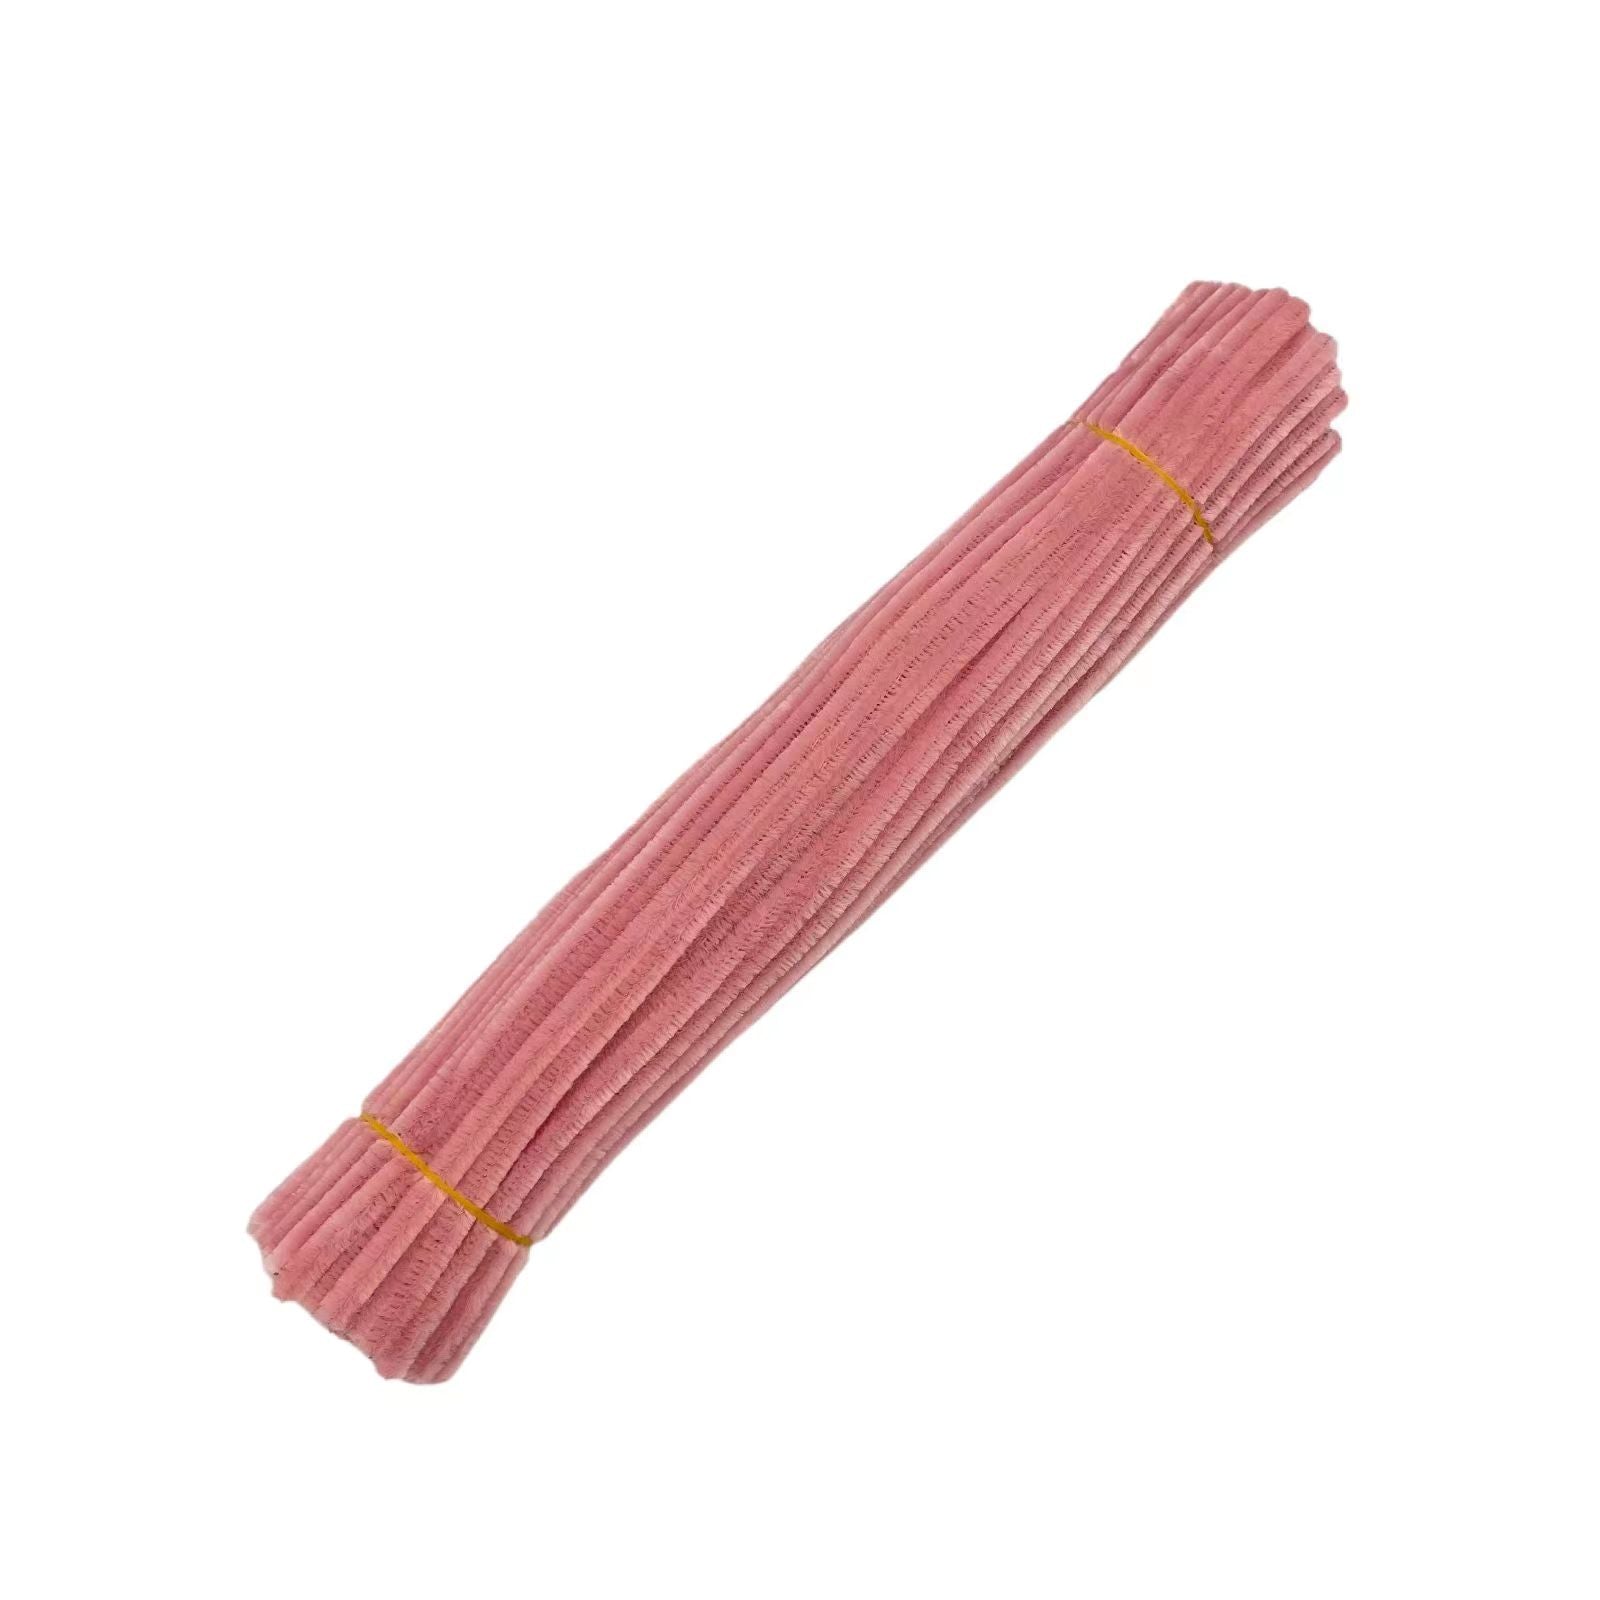 12 Plain Pink Chenille (Pipe Cleaner) 6MM Stems Choose Package Amount (25)